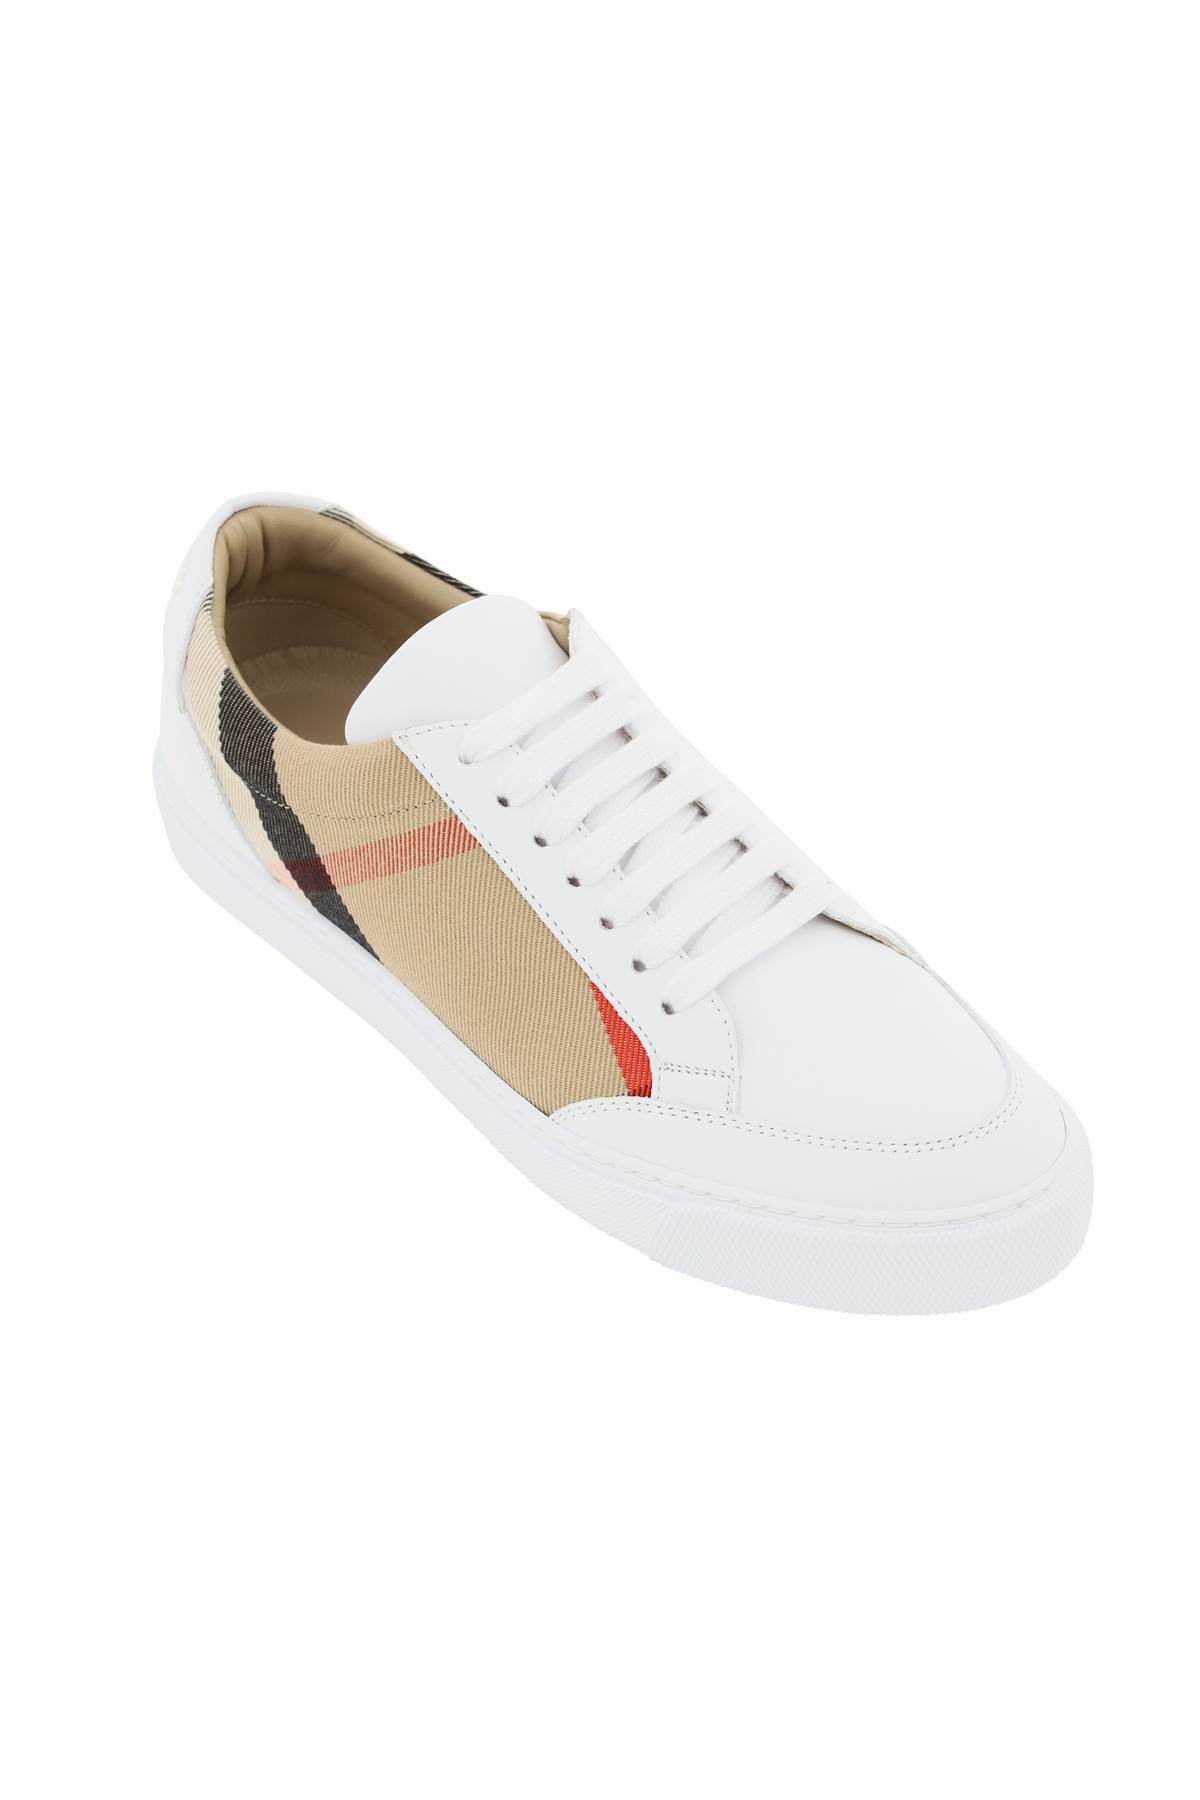 Shop Burberry Check Sneakers In Beige,white